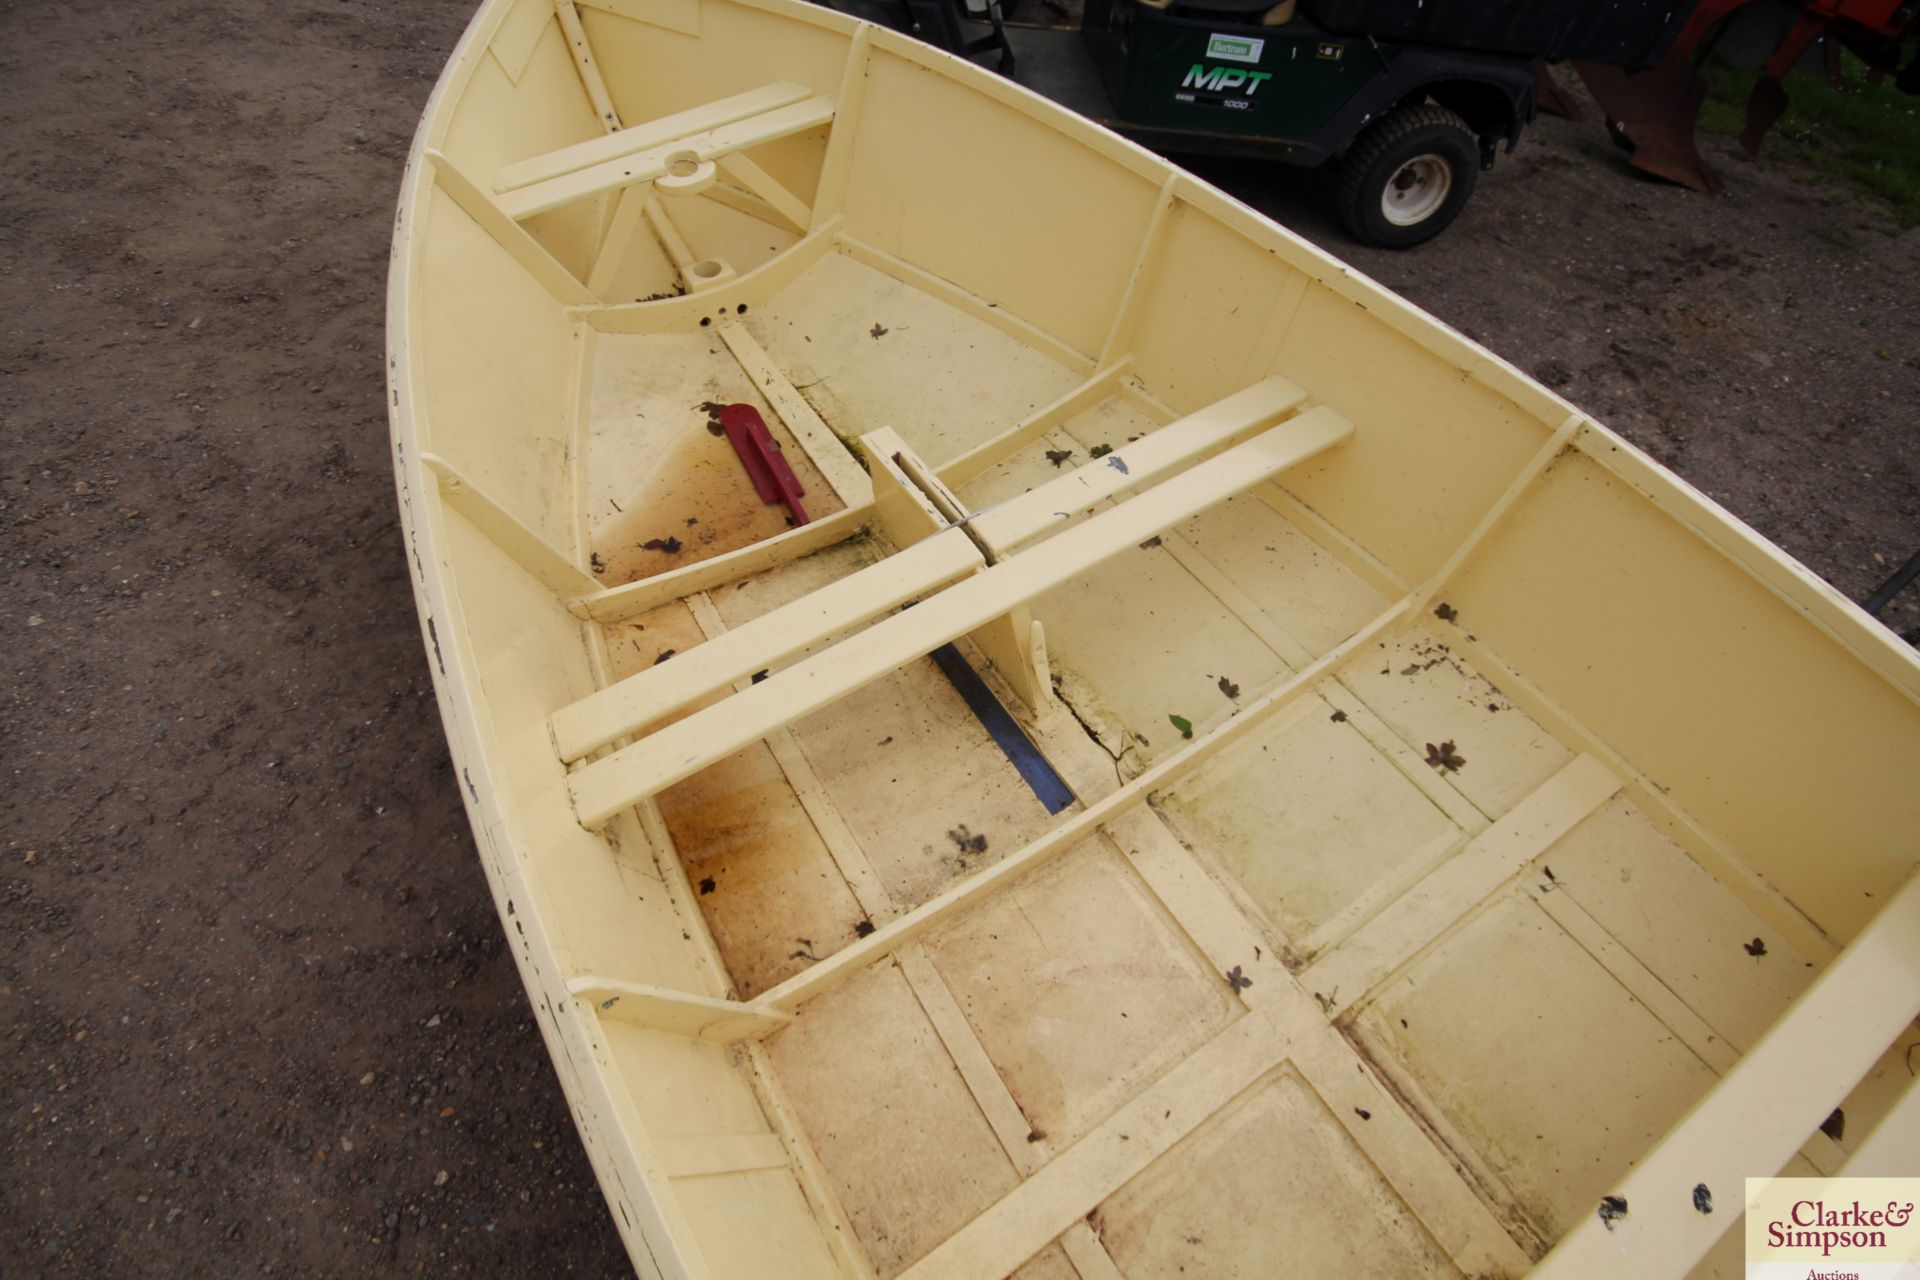 11ft dingy. - Image 5 of 6